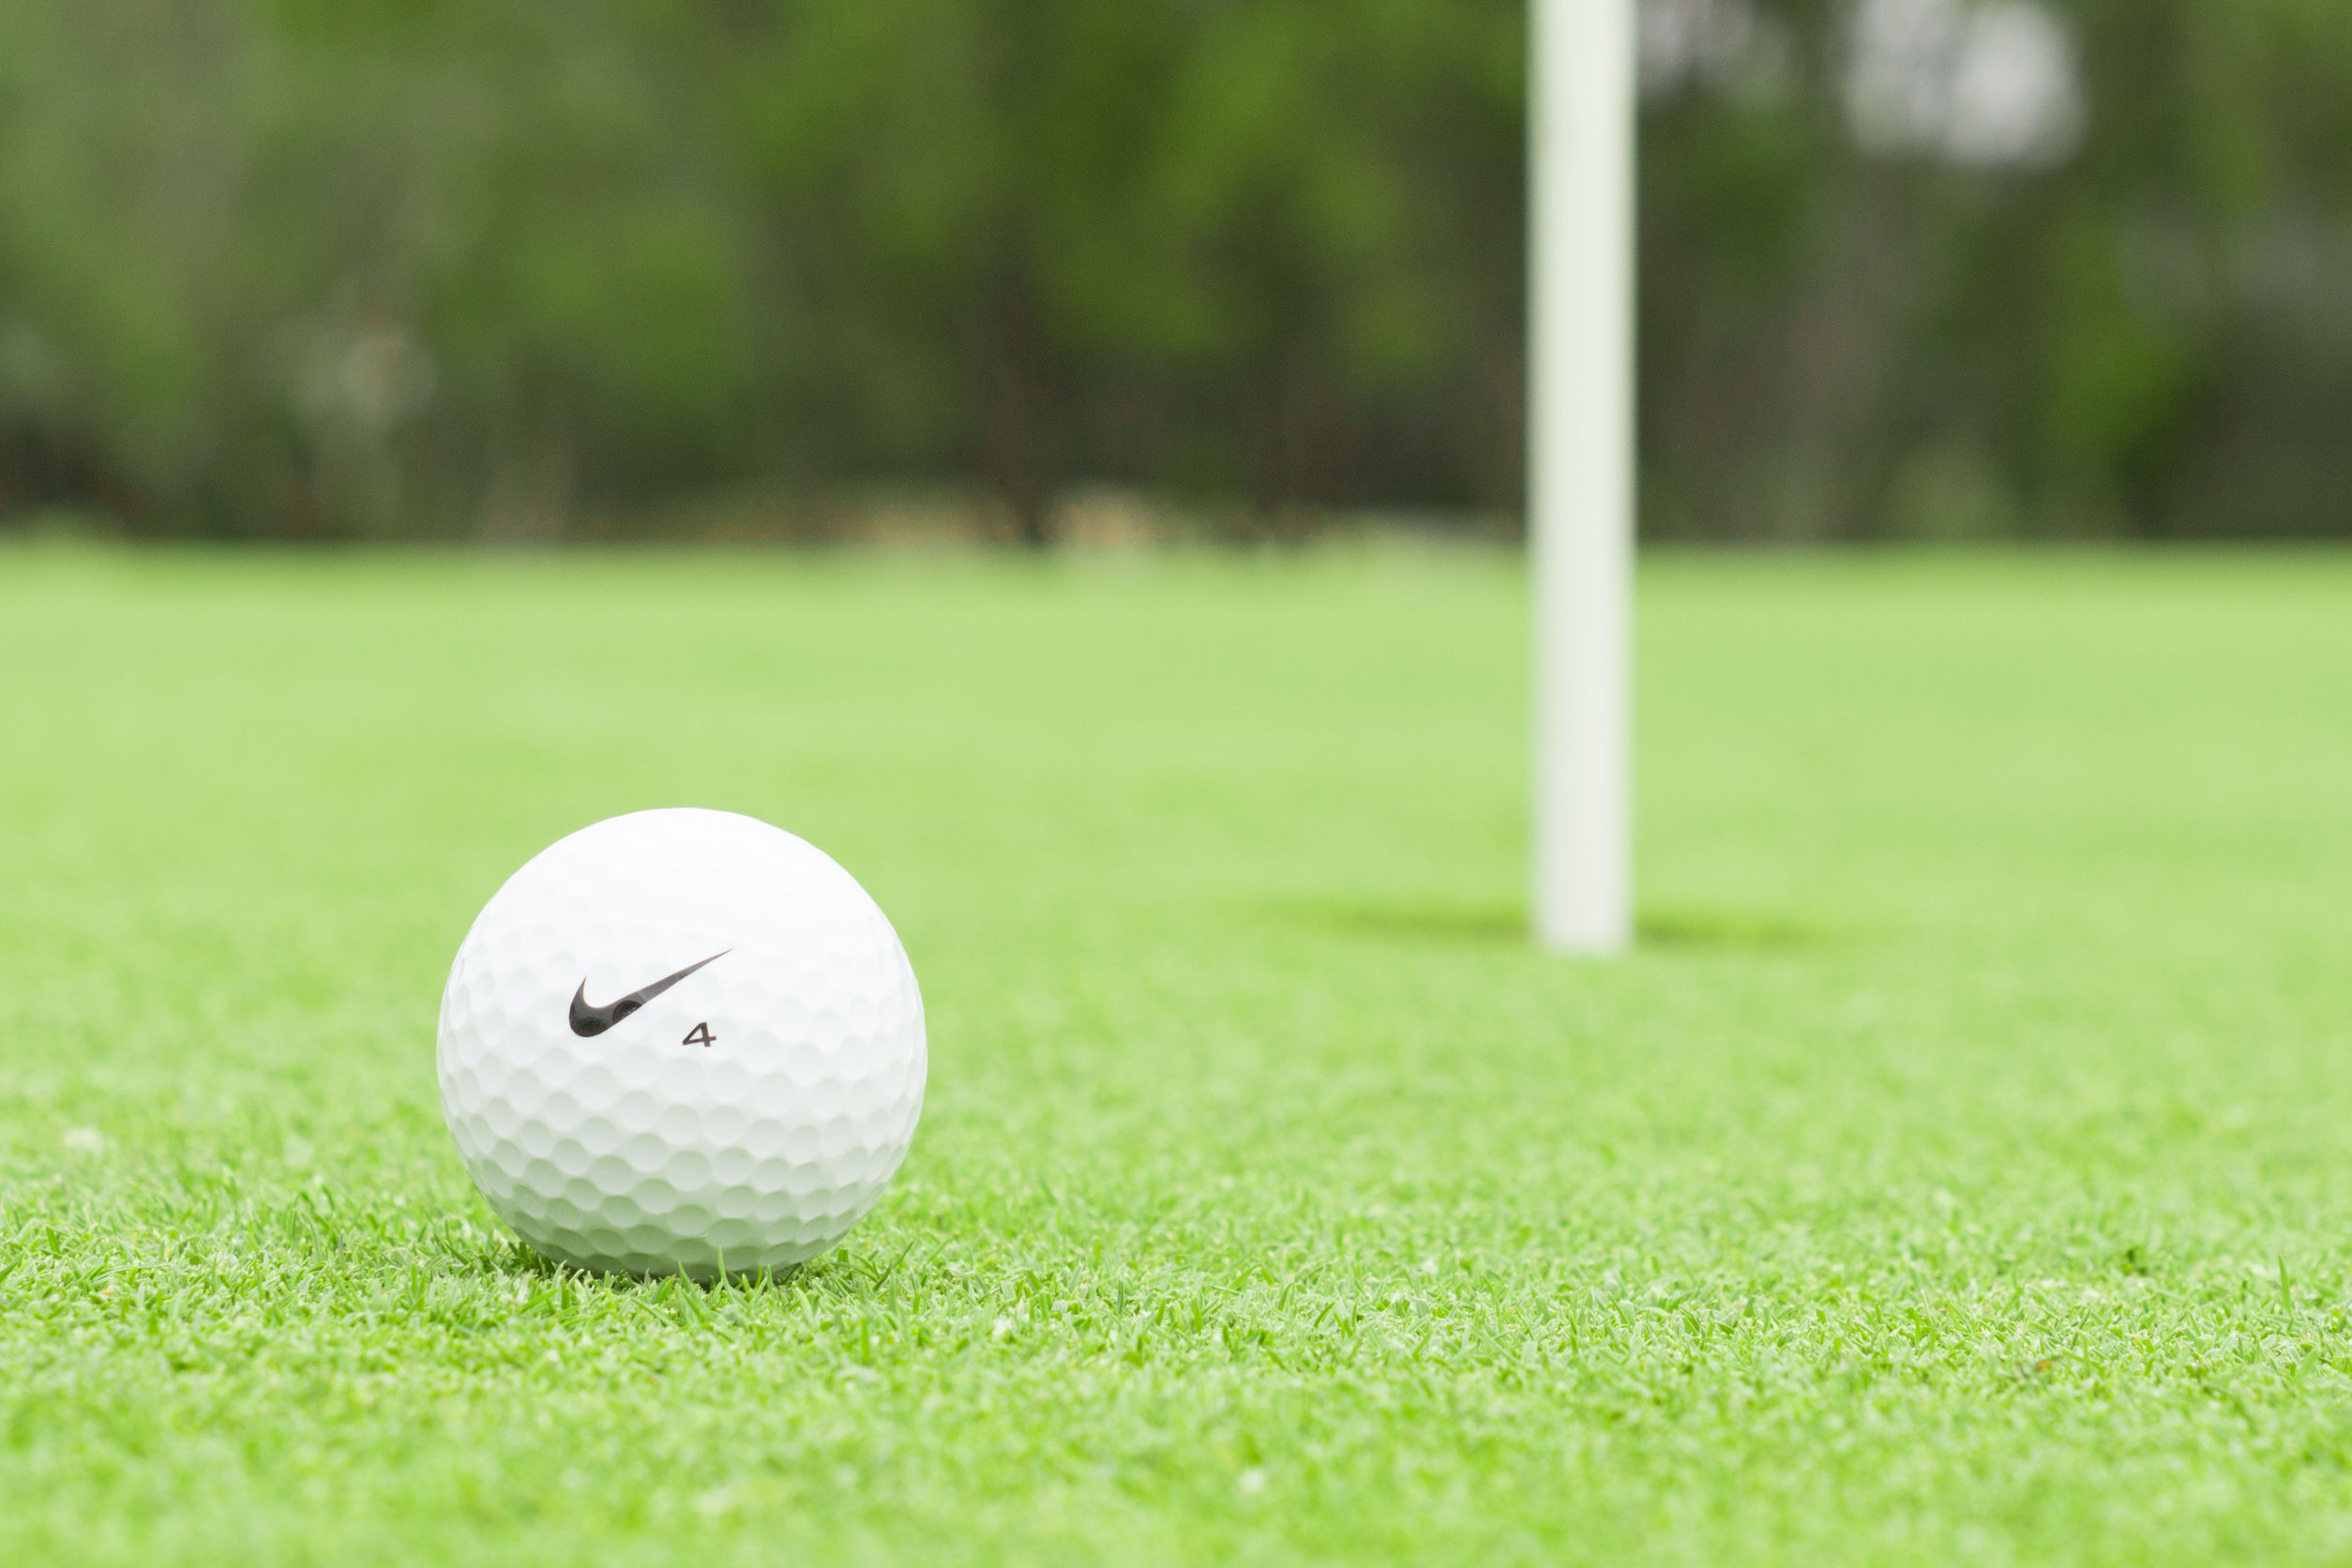 Nike Joins Adidas In Exiting Golf Equipment Business